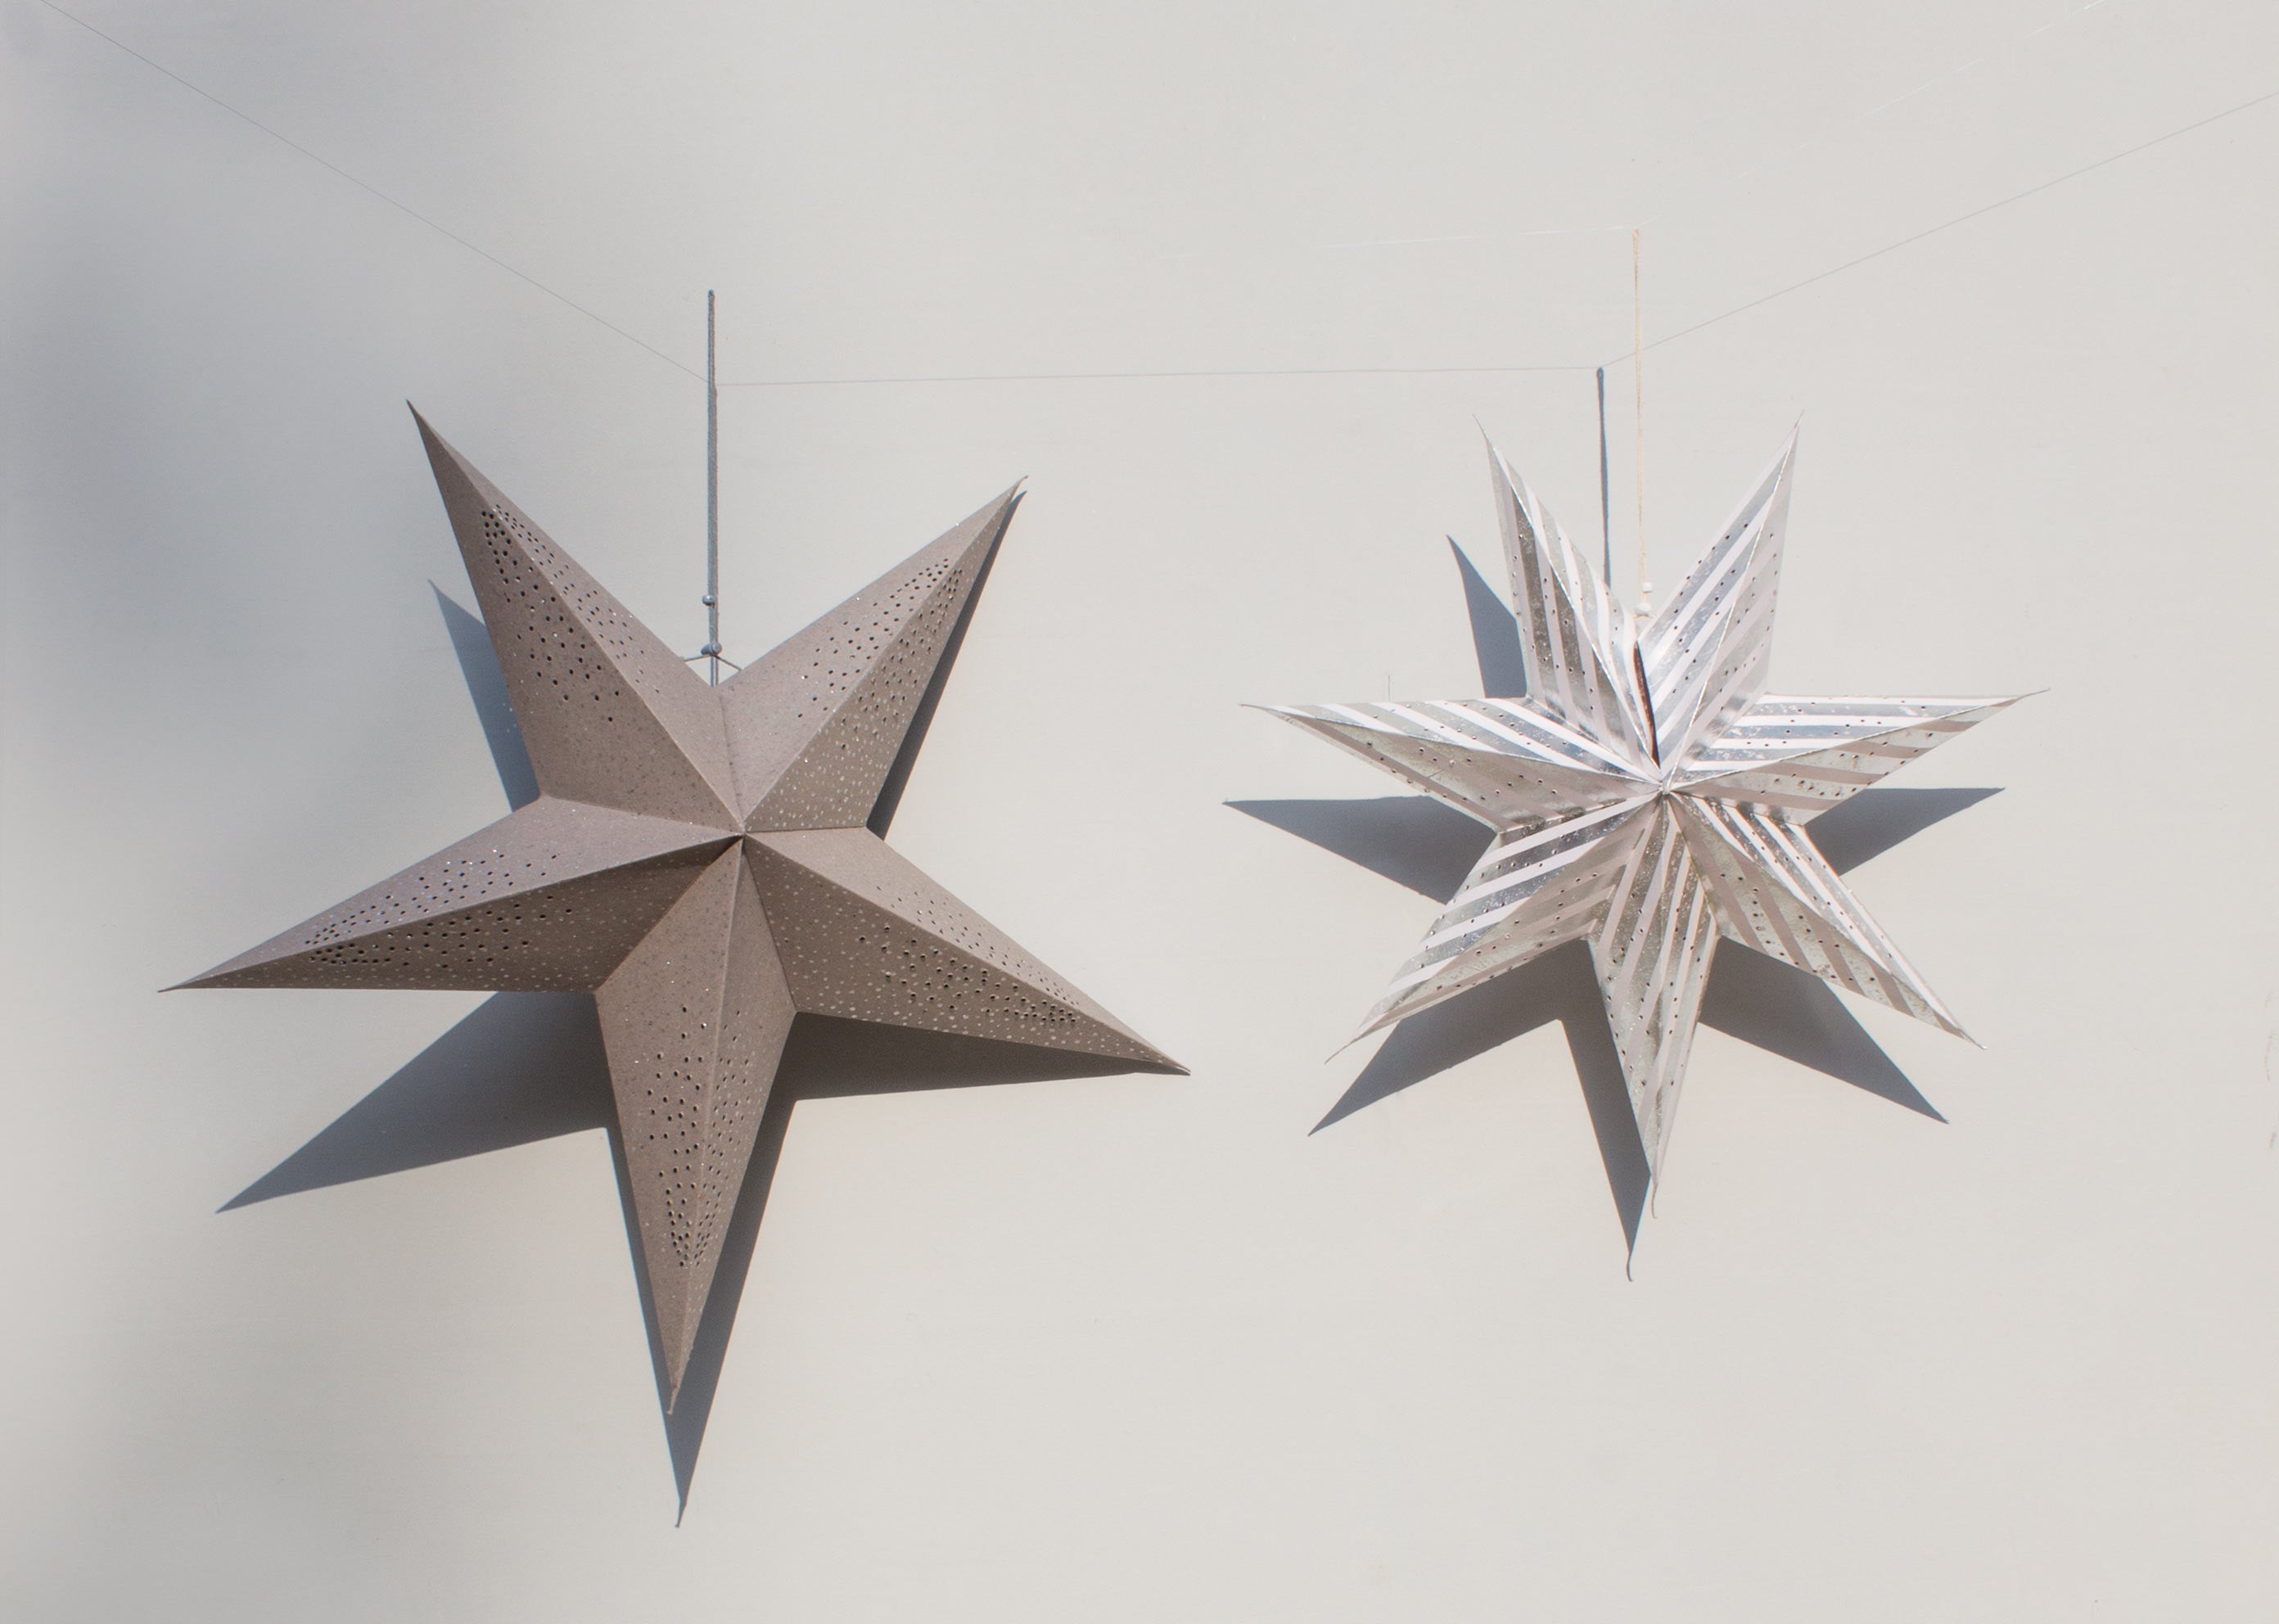 Silver Paper Star (Set of 2)